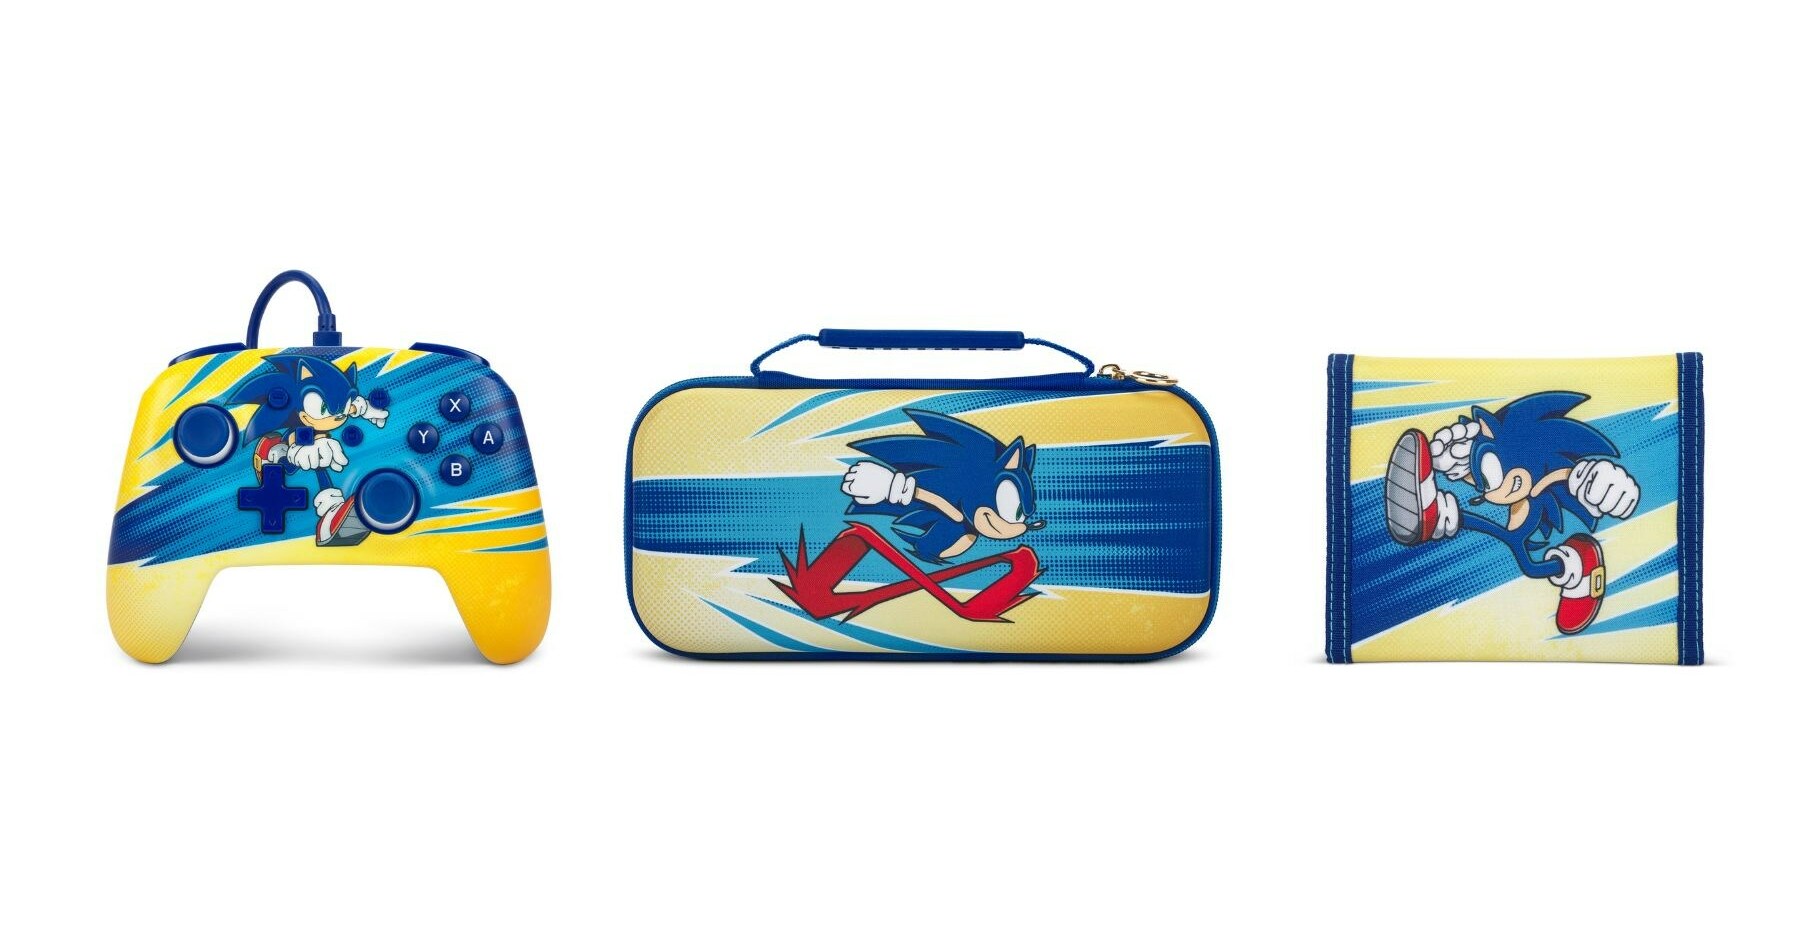 New Sonic The Hedgehog Merchandise Revealed; Knuckles G FUEL, Statues,  Controller & More - Noisy Pixel